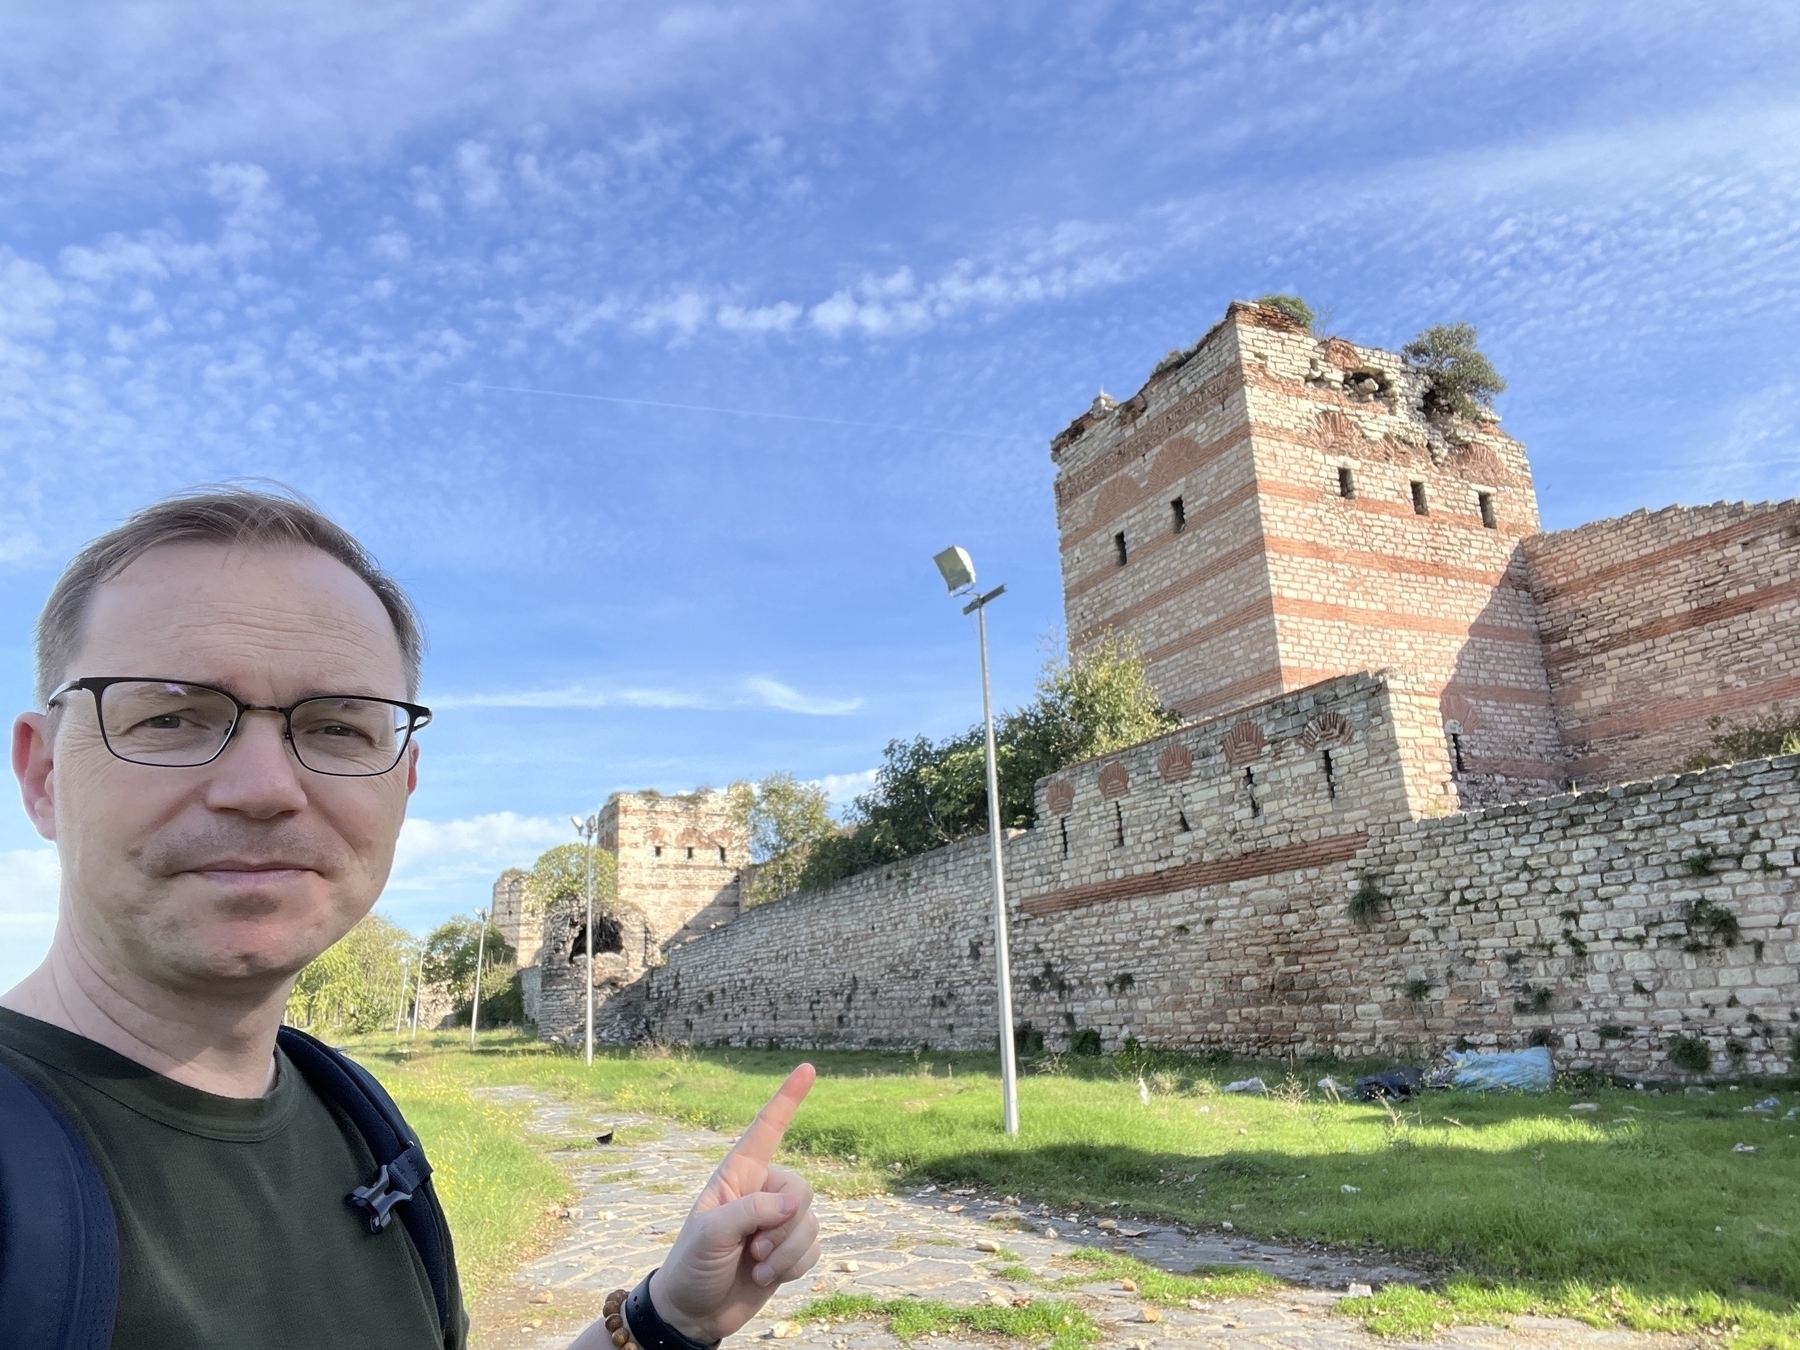 Chad poses with the walls of old city of Constantinople 